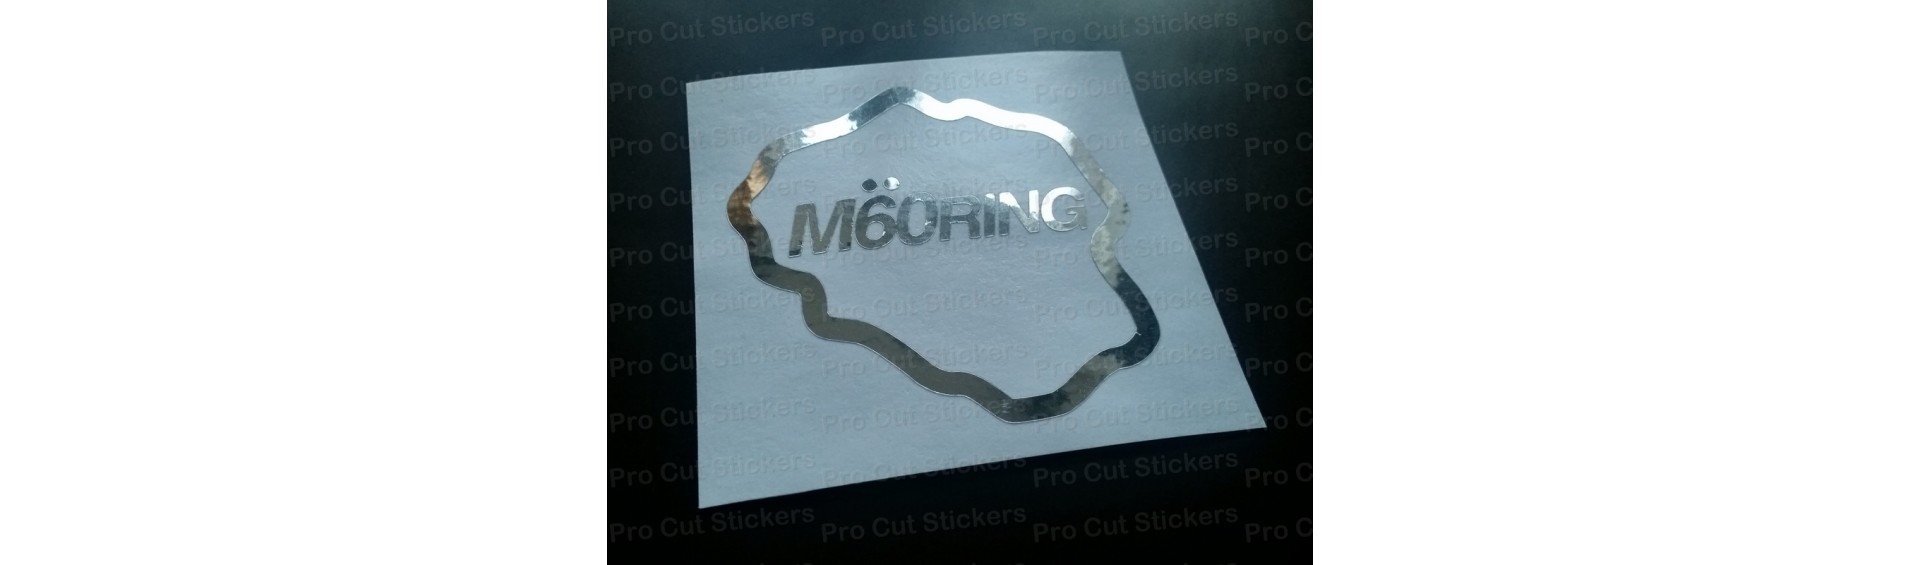 M60 M25 Ring Stickers